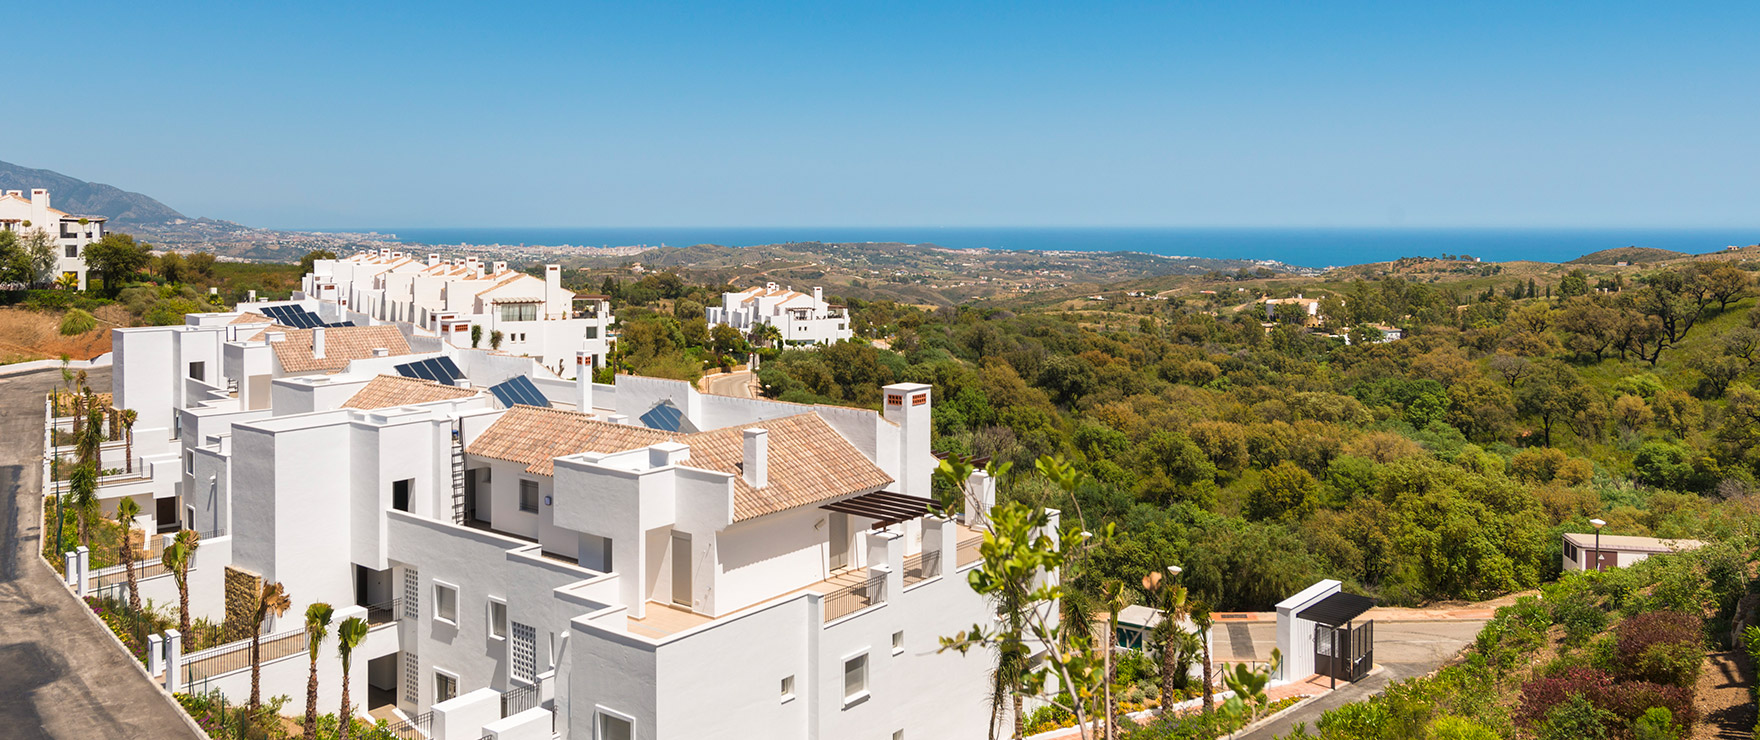 La Floresta Sur apartments for sale: Designed in a typical Mediterranean style, the apartments have spacious terraces on which to enjoy the beautiful views